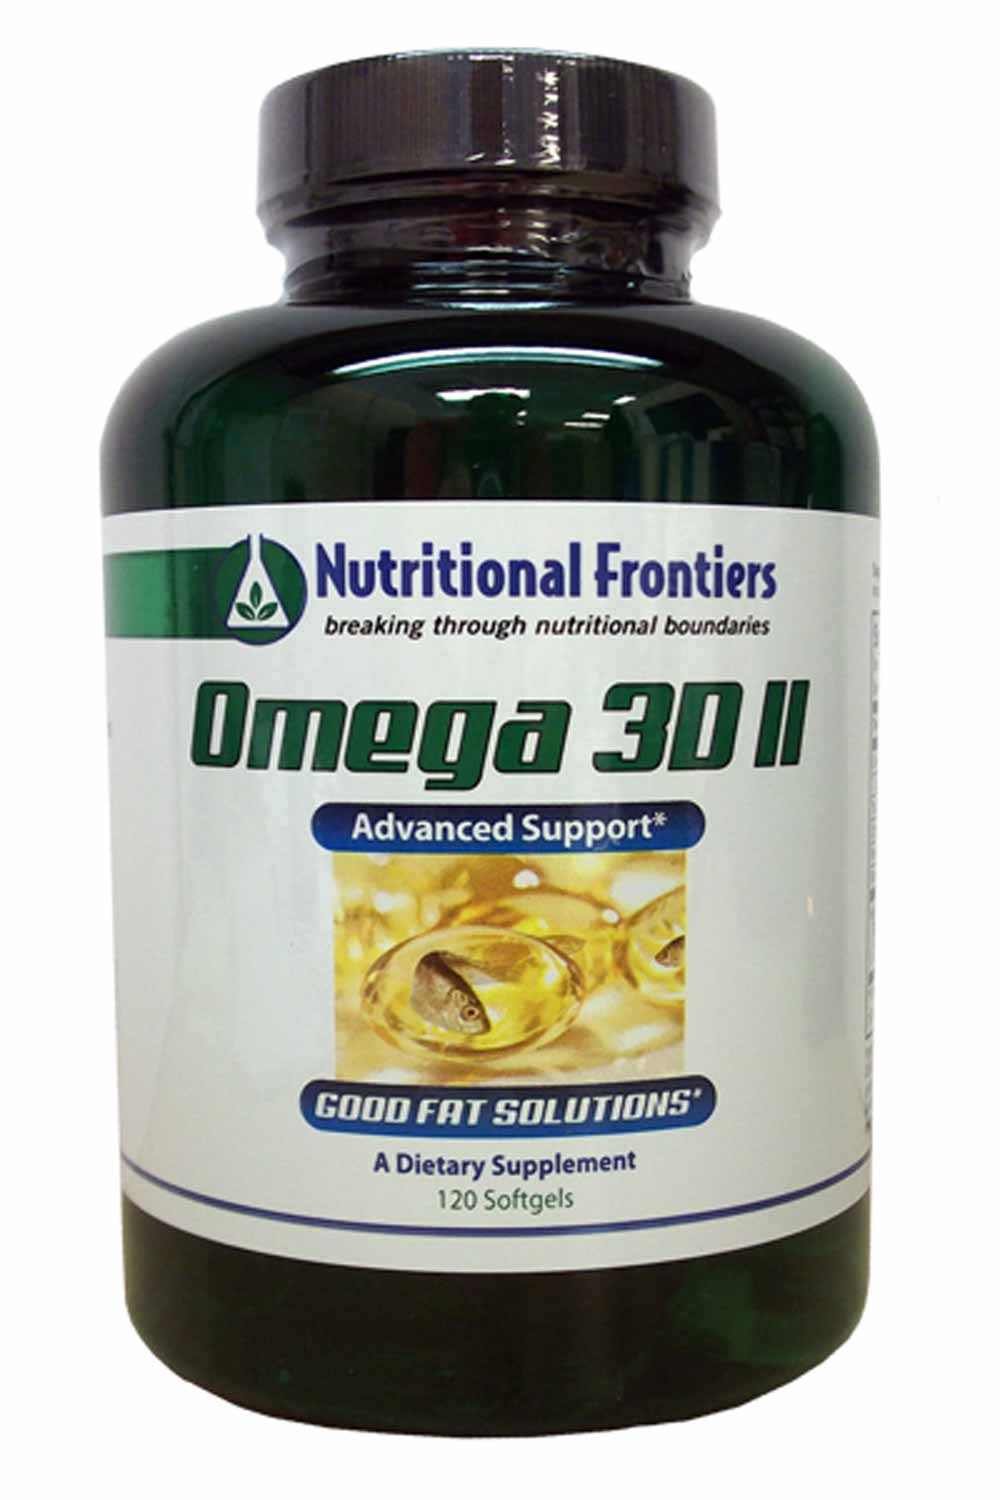 Nutritional Frontiers Omega 3D